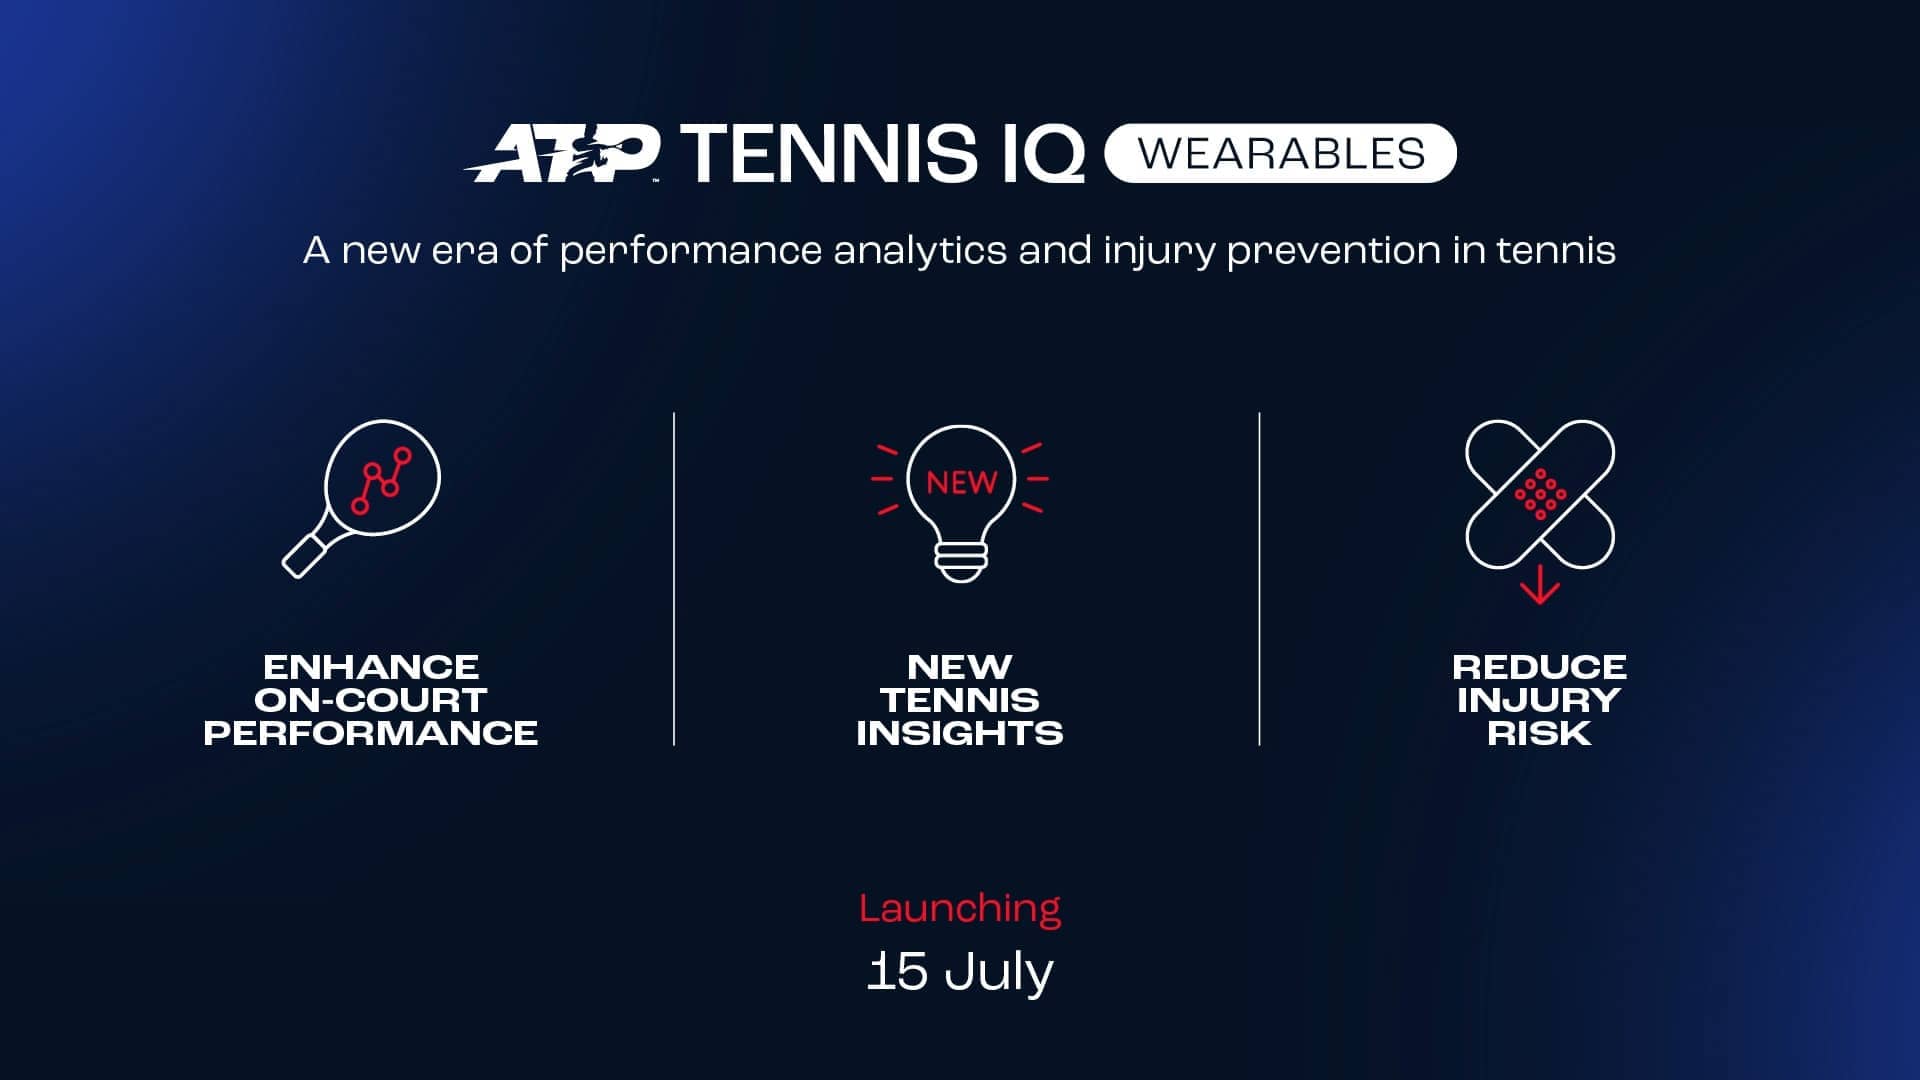 ATP approves in-competition wearables to enhance player performance & recovery